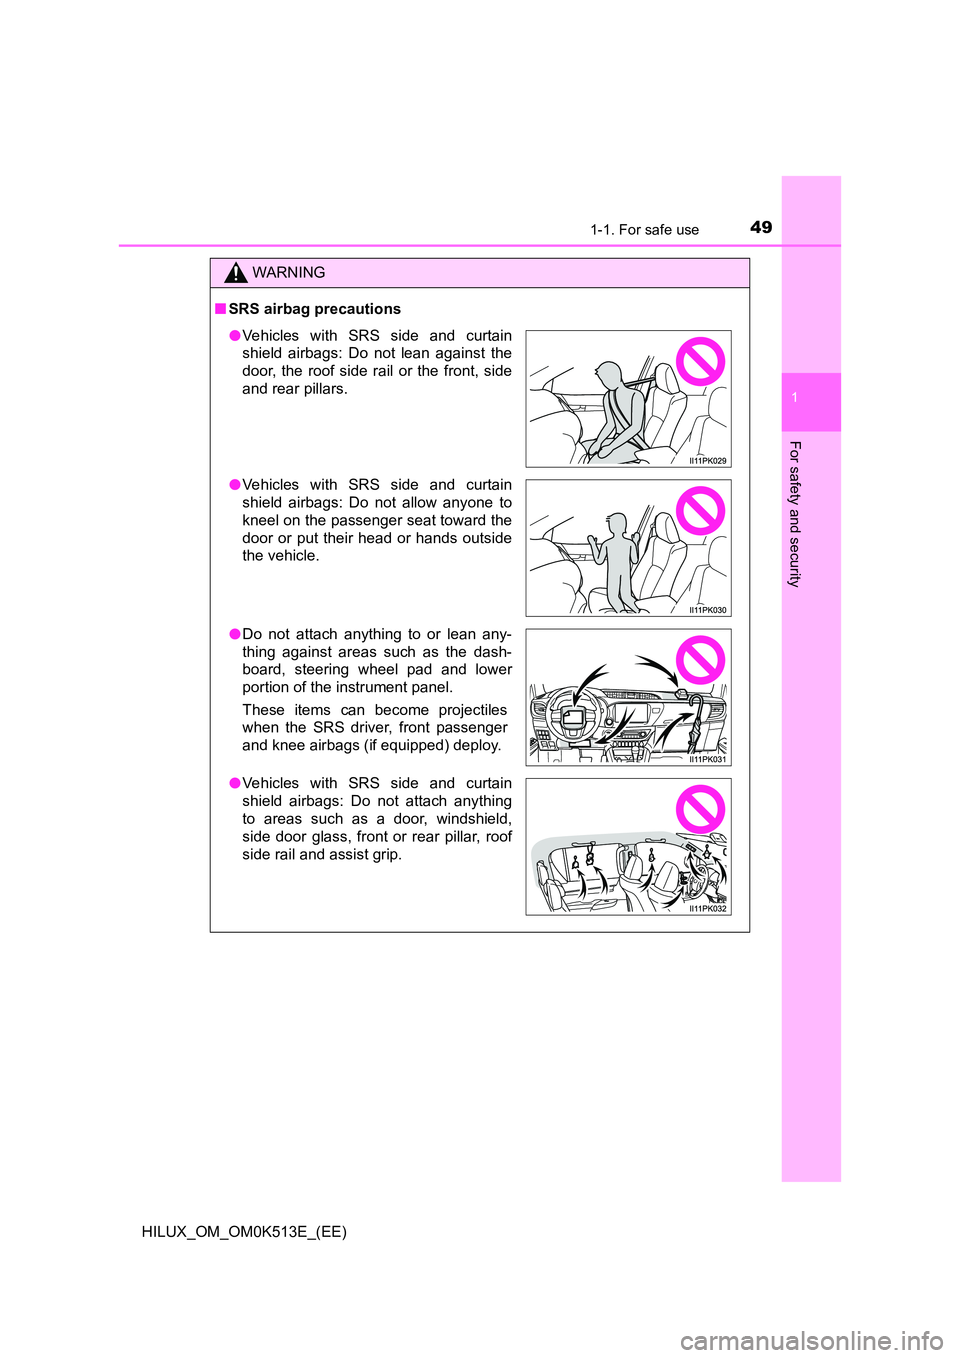 TOYOTA HILUX 2021  Owners Manual (in English) 491-1. For safe use
1
HILUX_OM_OM0K513E_(EE)
For safety and security
WARNING
�QSRS airbag precautions
�OVehicles with SRS side and curtain 
shield airbags: Do not lean against the 
door, the roof side